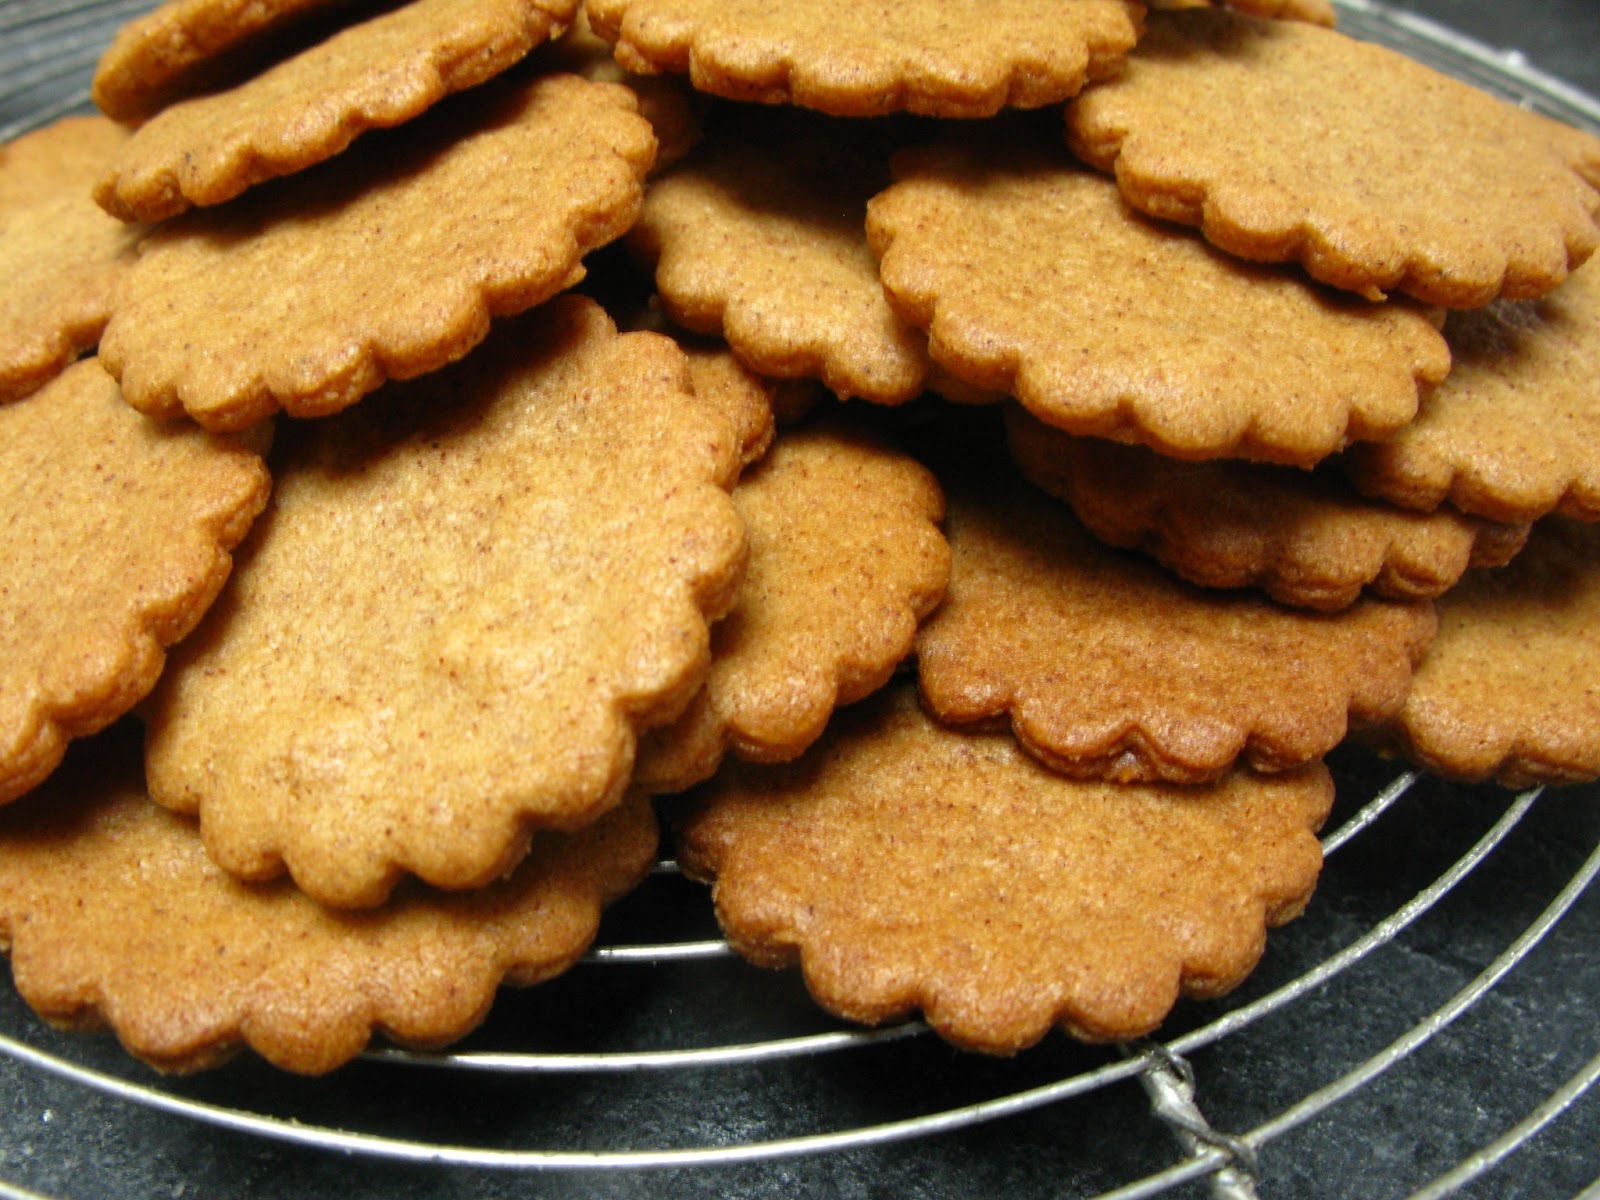 What Is Speculoos?